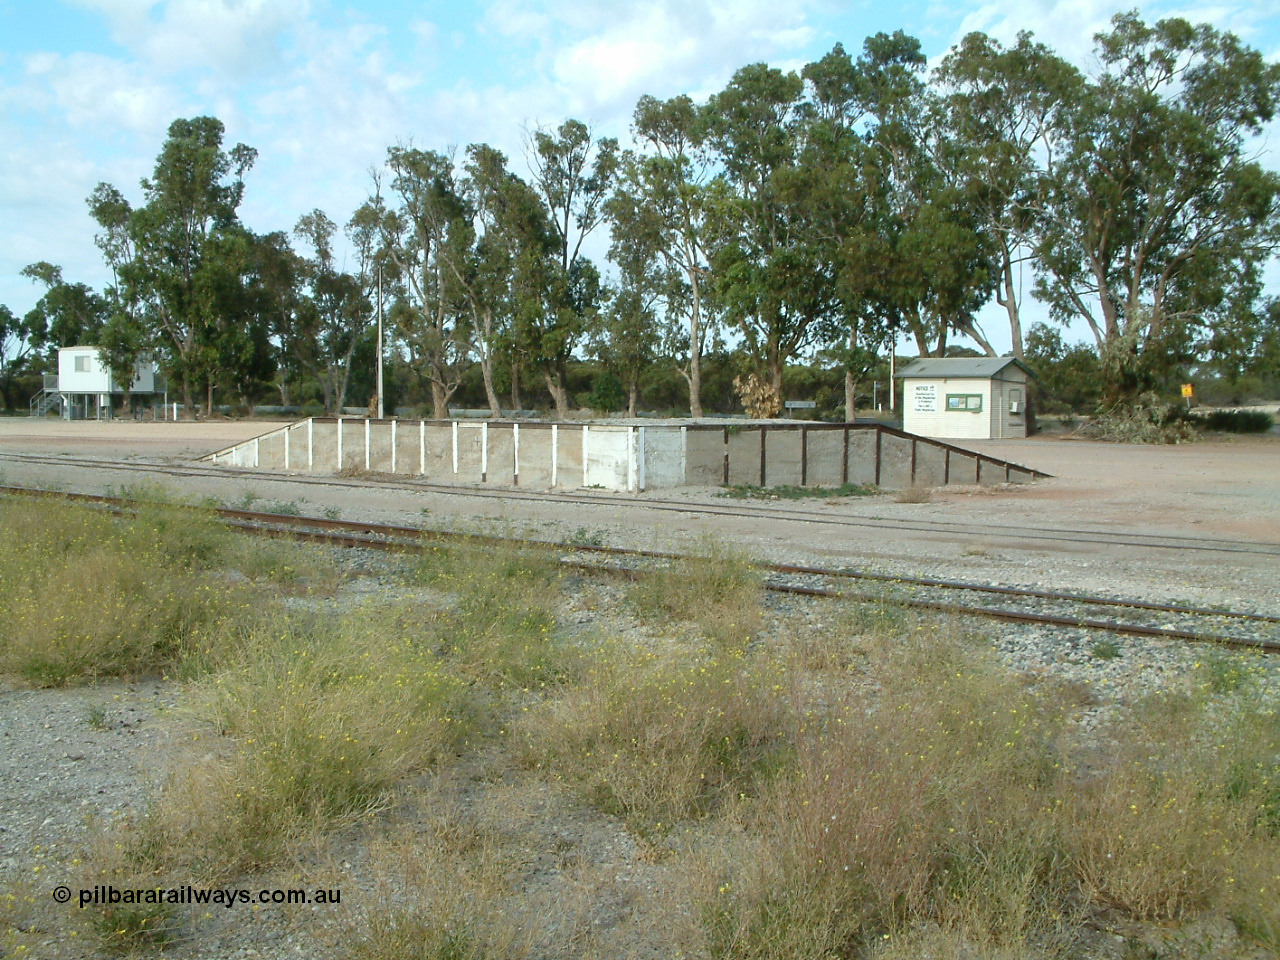 030406 084446
Tooligie, yard view looking across mainline to siding and loading ramp, weighbridge scale room in the right background. 6th April 2003.
